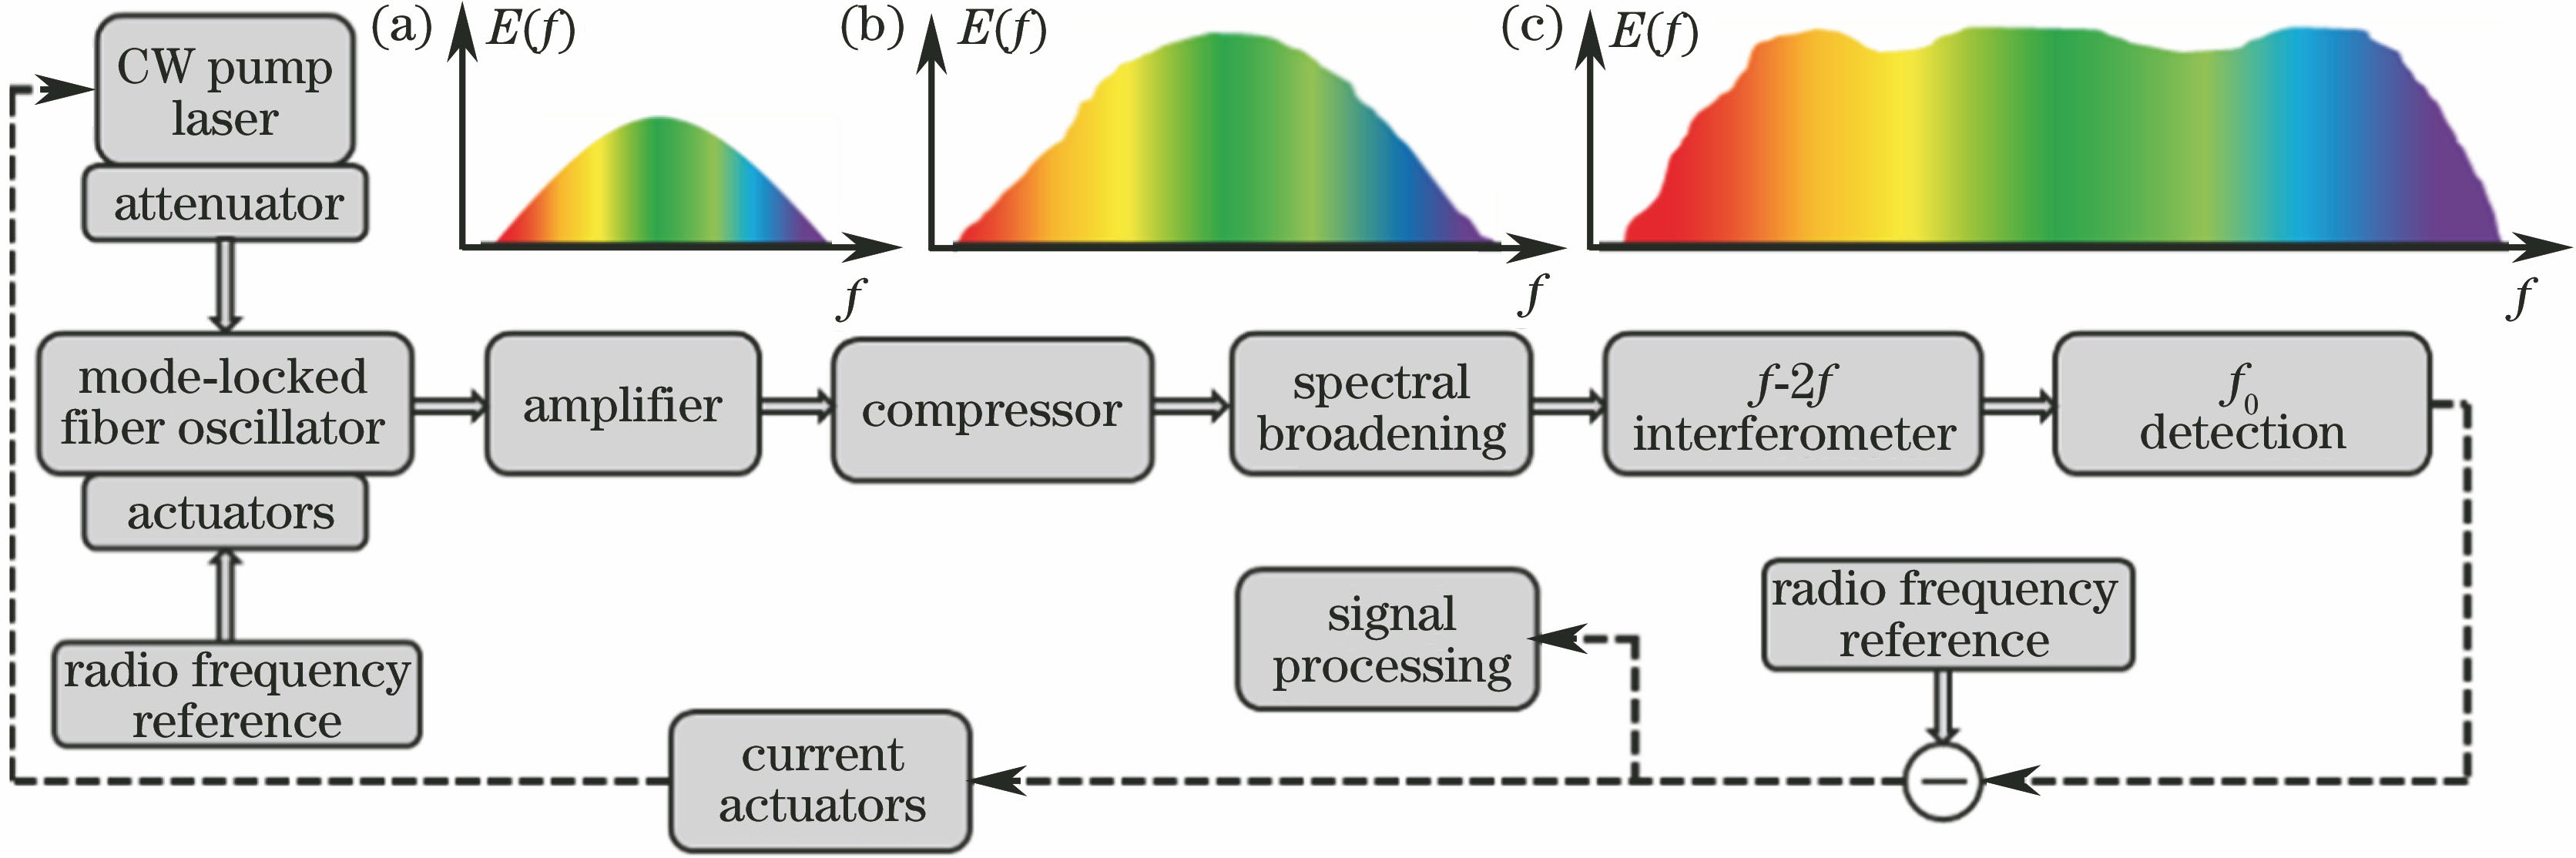 Typical framework of a frequency comb. (a) Output spectrum of mode-locked laser; (b) amplifier output spectrum; (c) supercontinuum spectrum